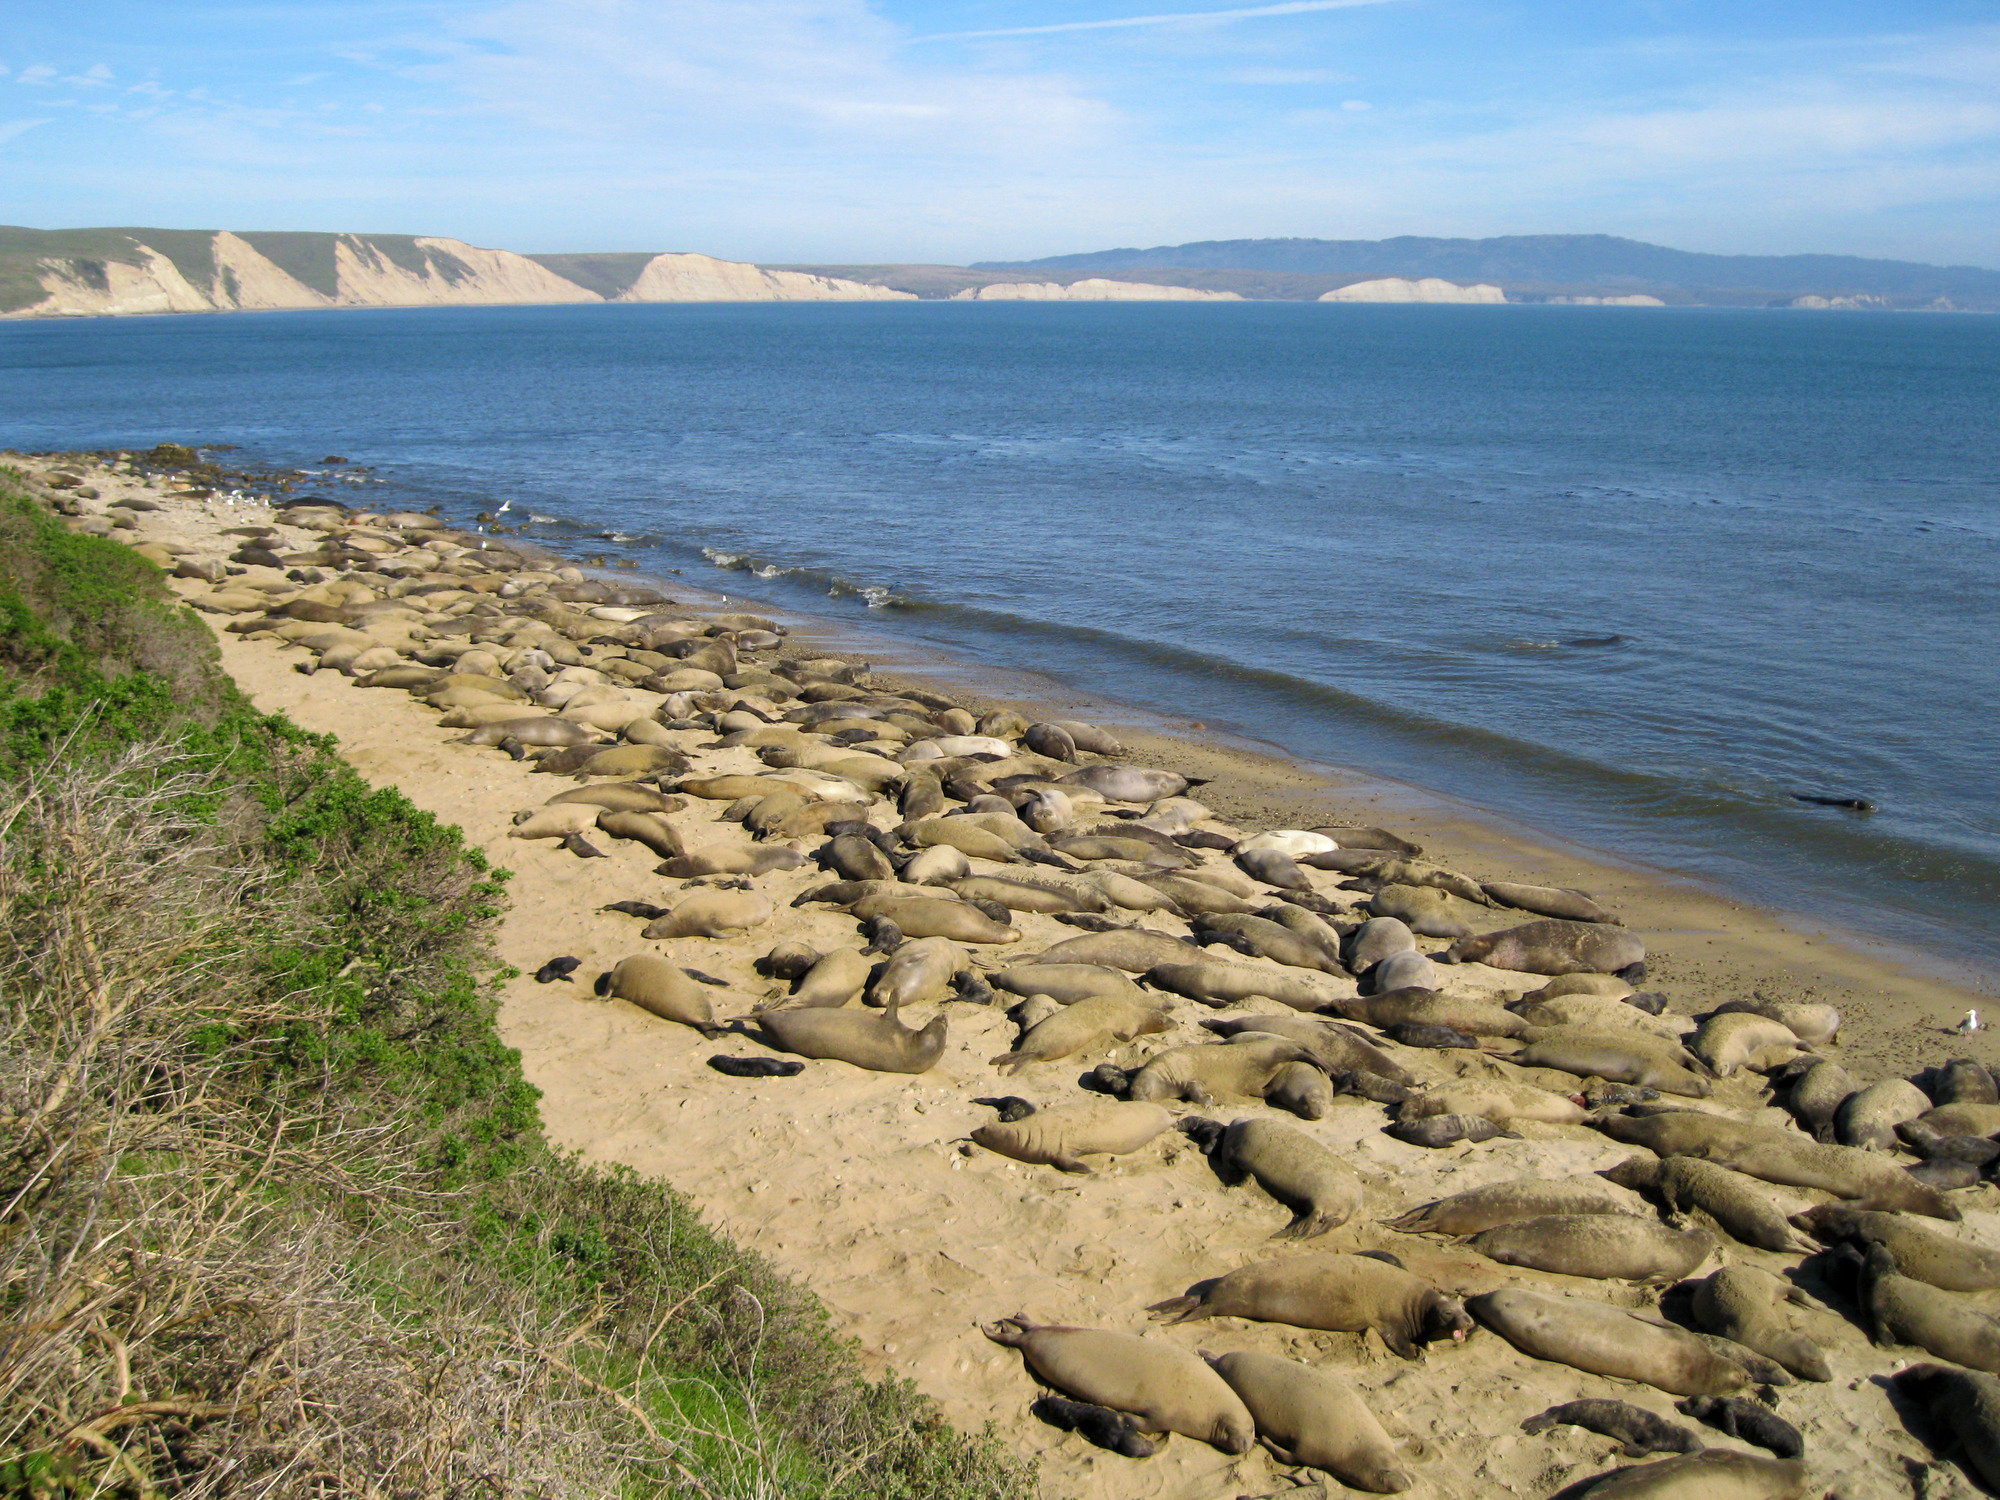 View of a long stretch of beach covered mostly by elephant seal cows and pups